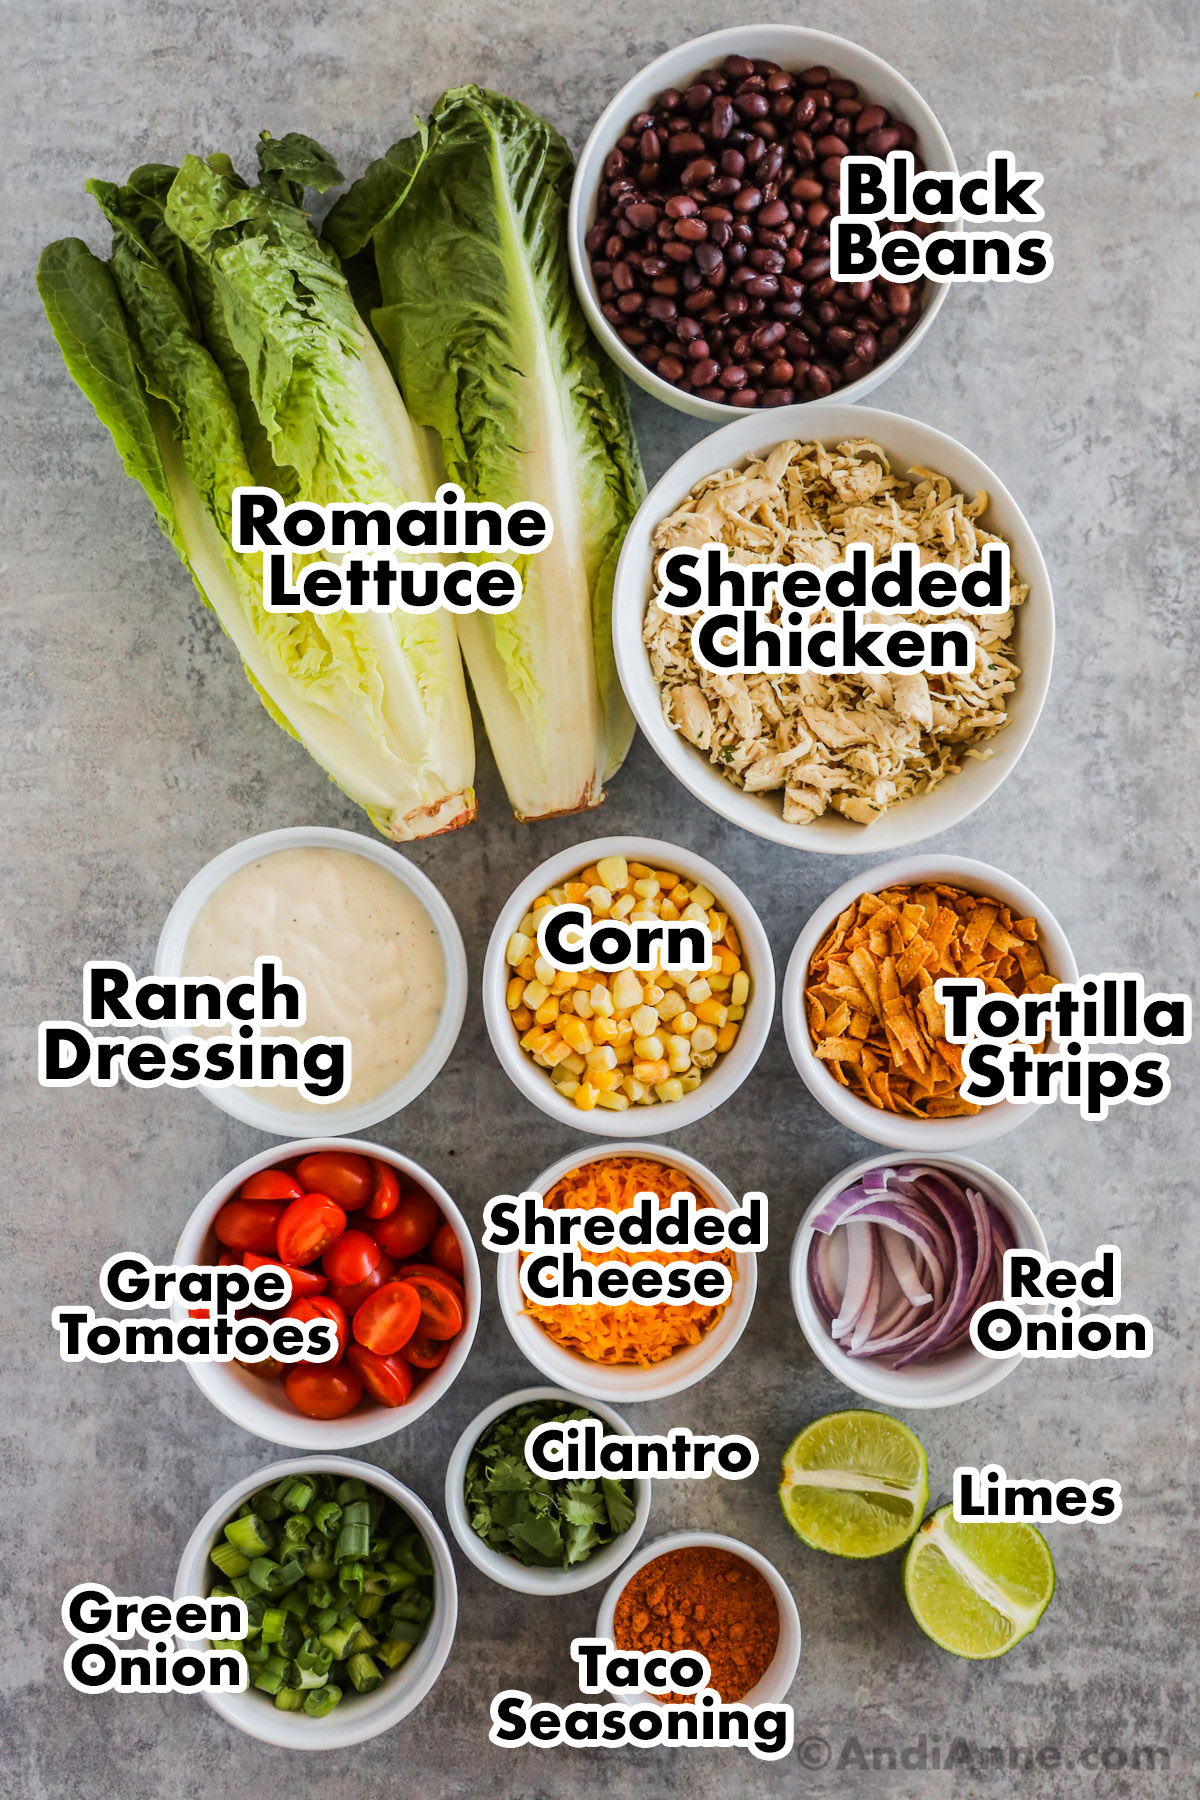 Recipe ingredients on the counter including romaine lettuce heads, bowls of black beans, shredded chicken, ranch dressing, corn, tortilla strips, tomatoes, red onions, green onion and taco seasoning.